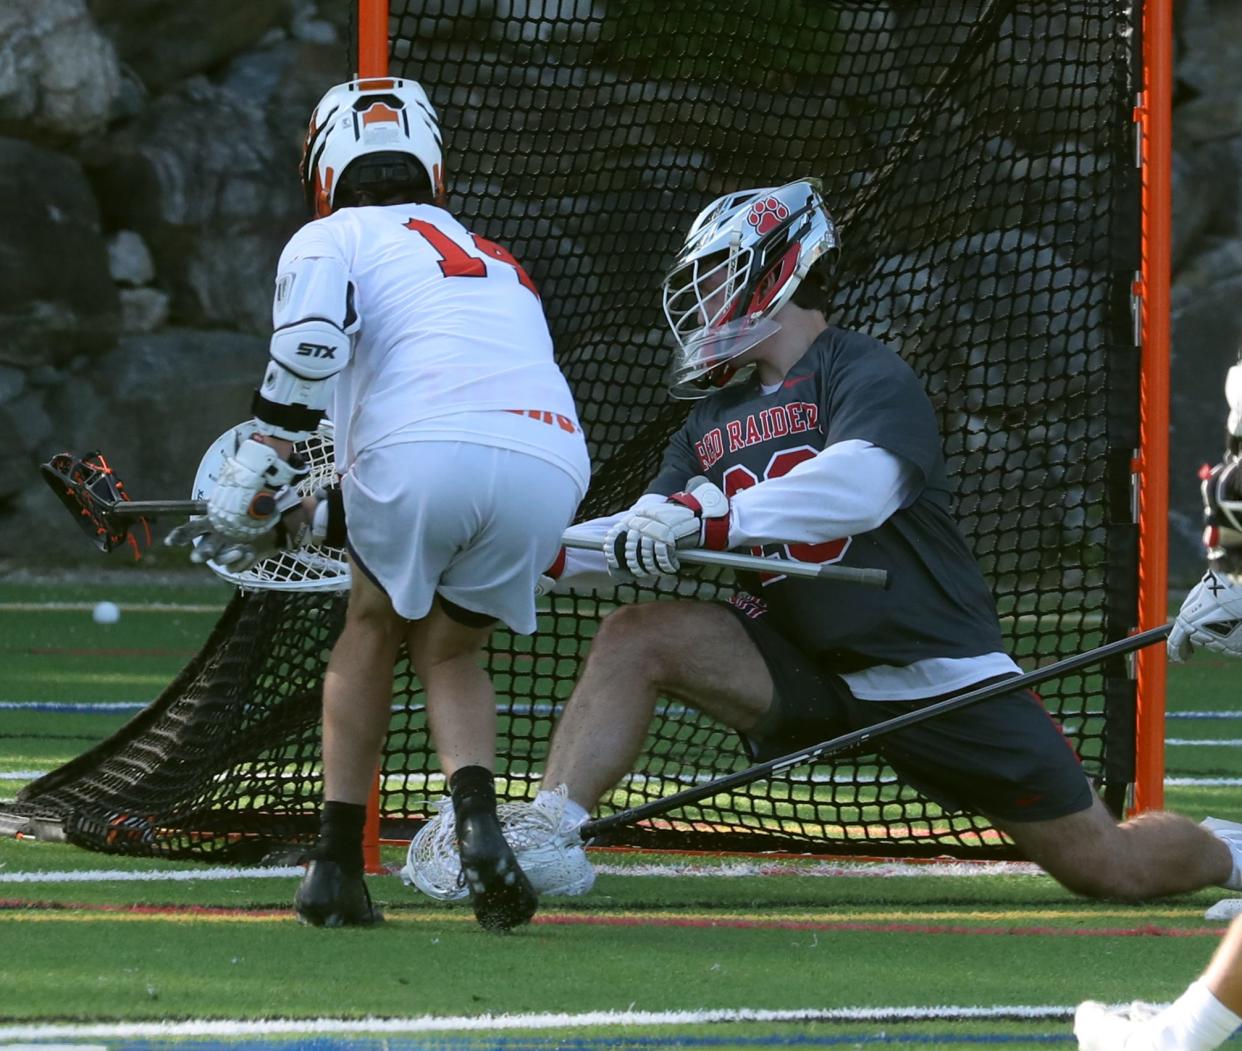 Mamaroneck's Grant Mathieson scores past North Rockland goalie Kevin Devine during their Section 1 Class A semifinal at Mamaroneck May 26, 2023. Mamaroneck won 12-7.